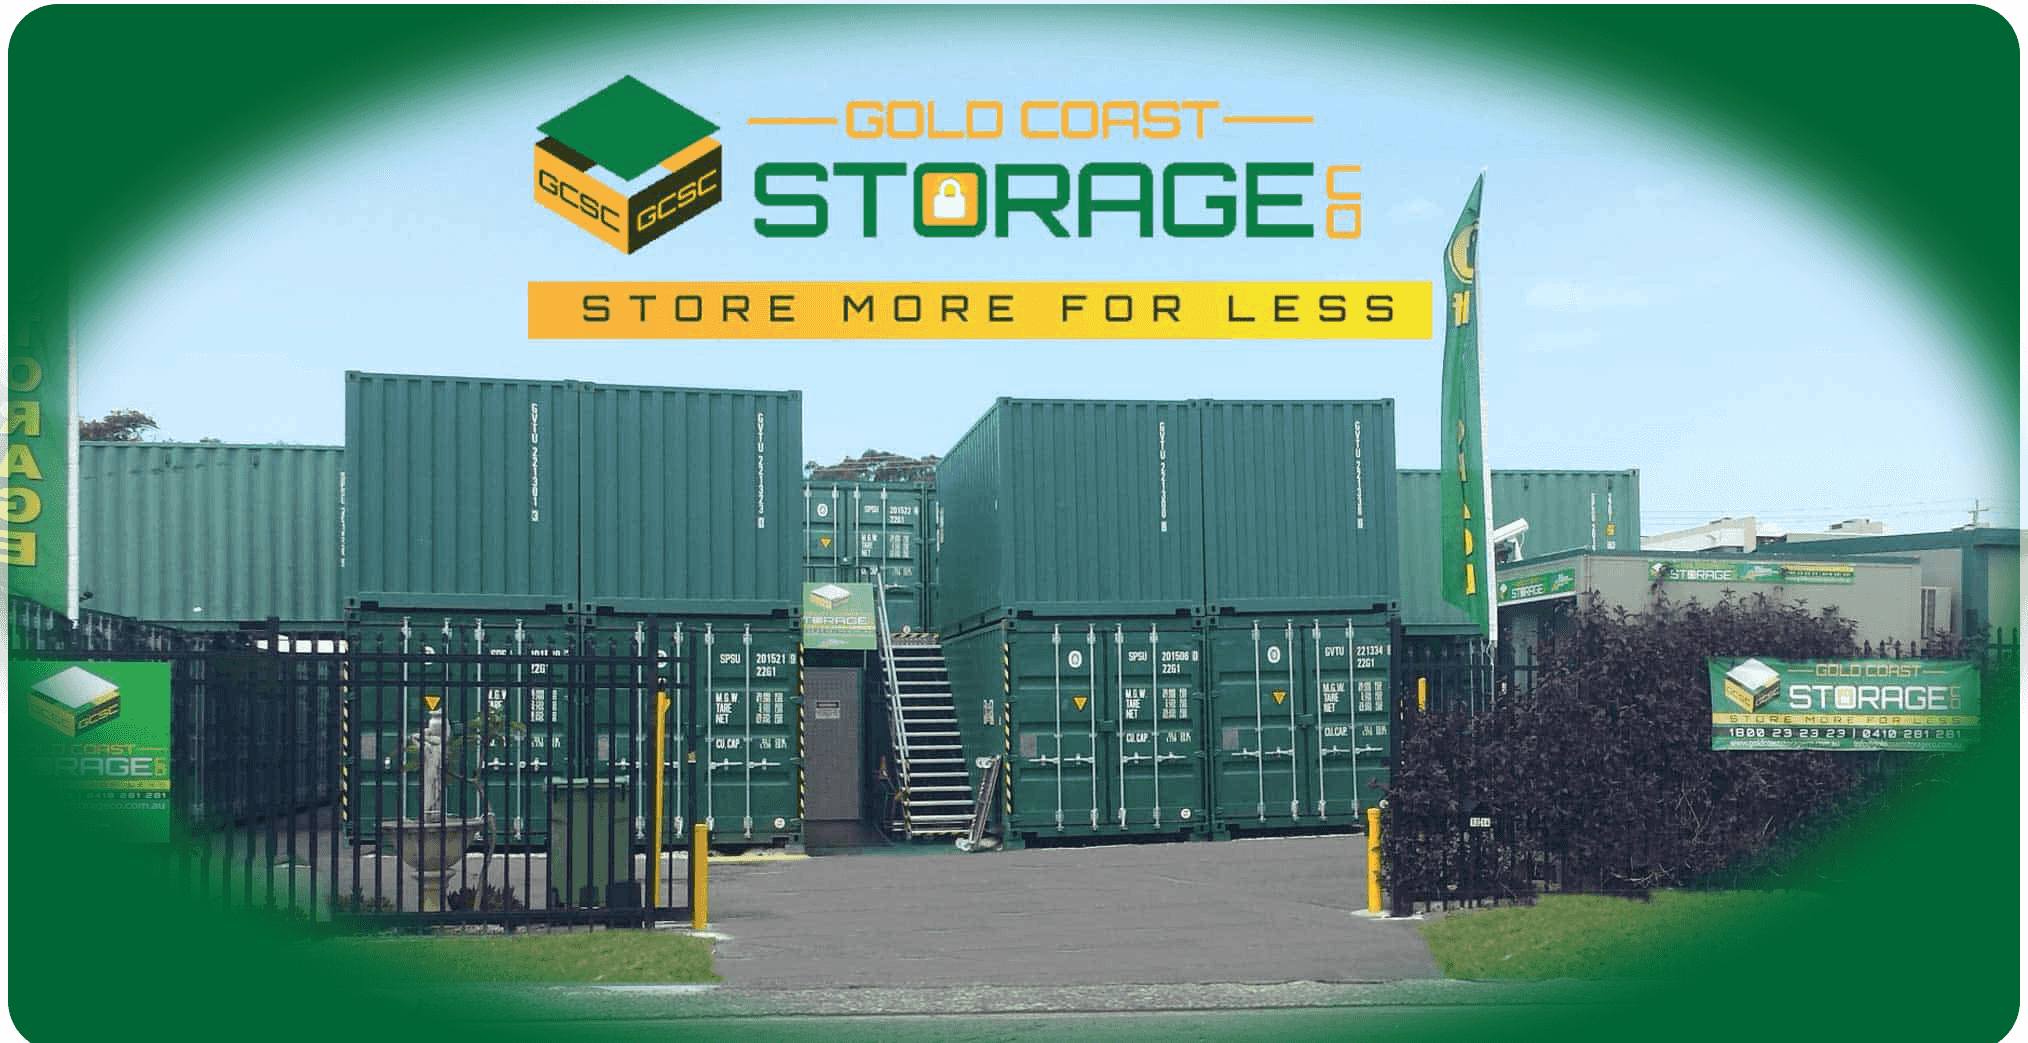 Gold Coast Storage® Store more for less | 12 Hillcrest Parade, Miami, Queensland 4220 | +61 410 281 281